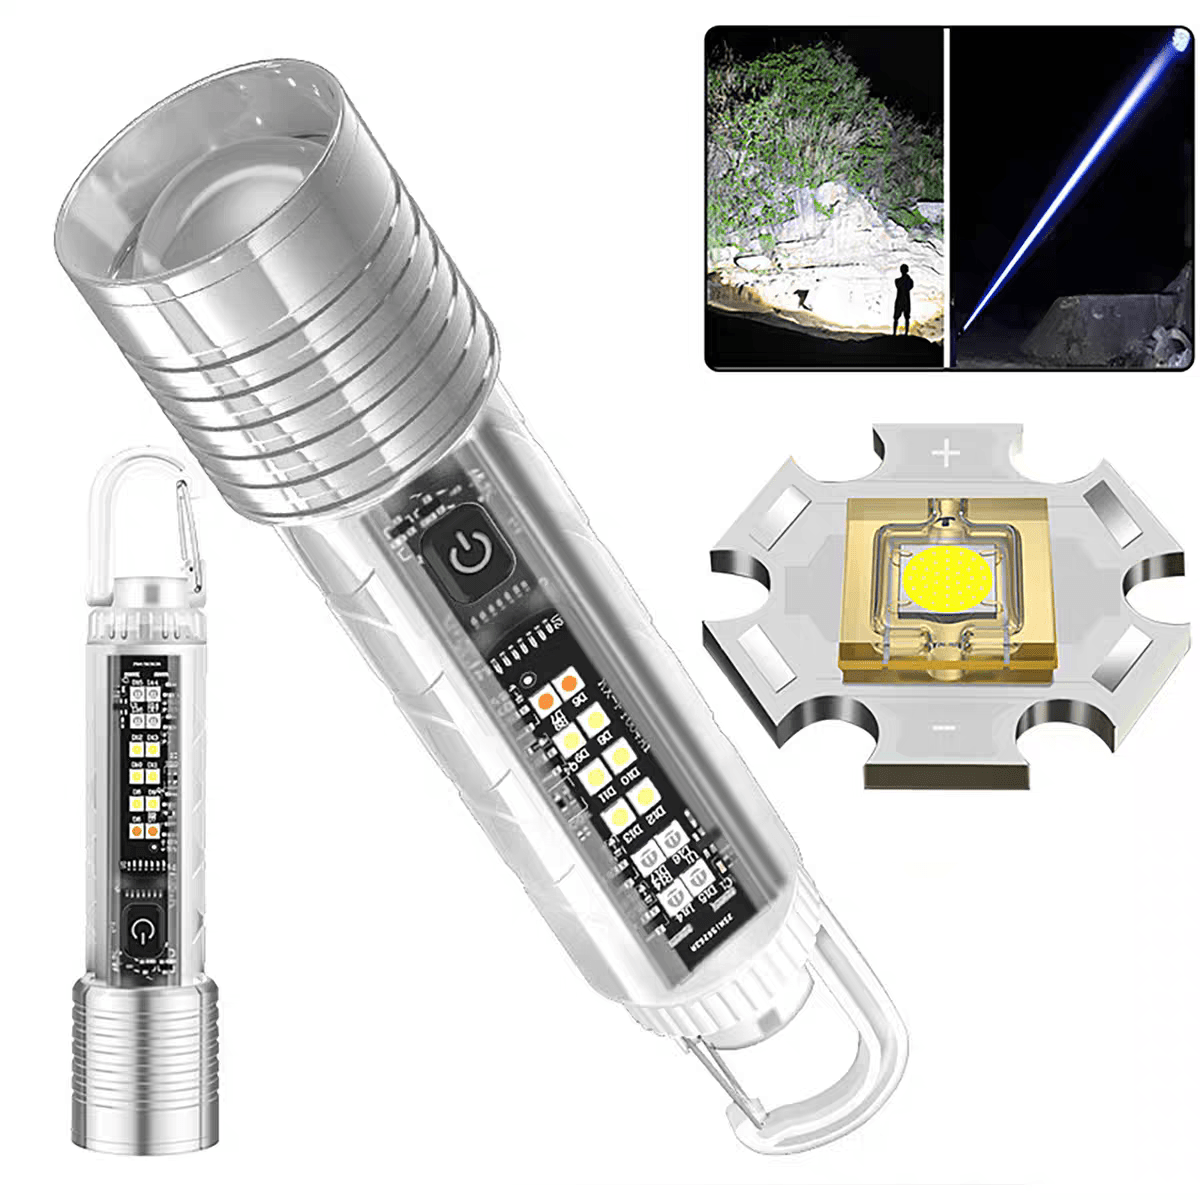 

Rechargeable Flashlights, 8 Mode Tactical Flashlights High Lumens Super Bright Flashlight Powerful, Led Flashlight Rechargeable, Flash Light High Powered For Home Emergencies Camping